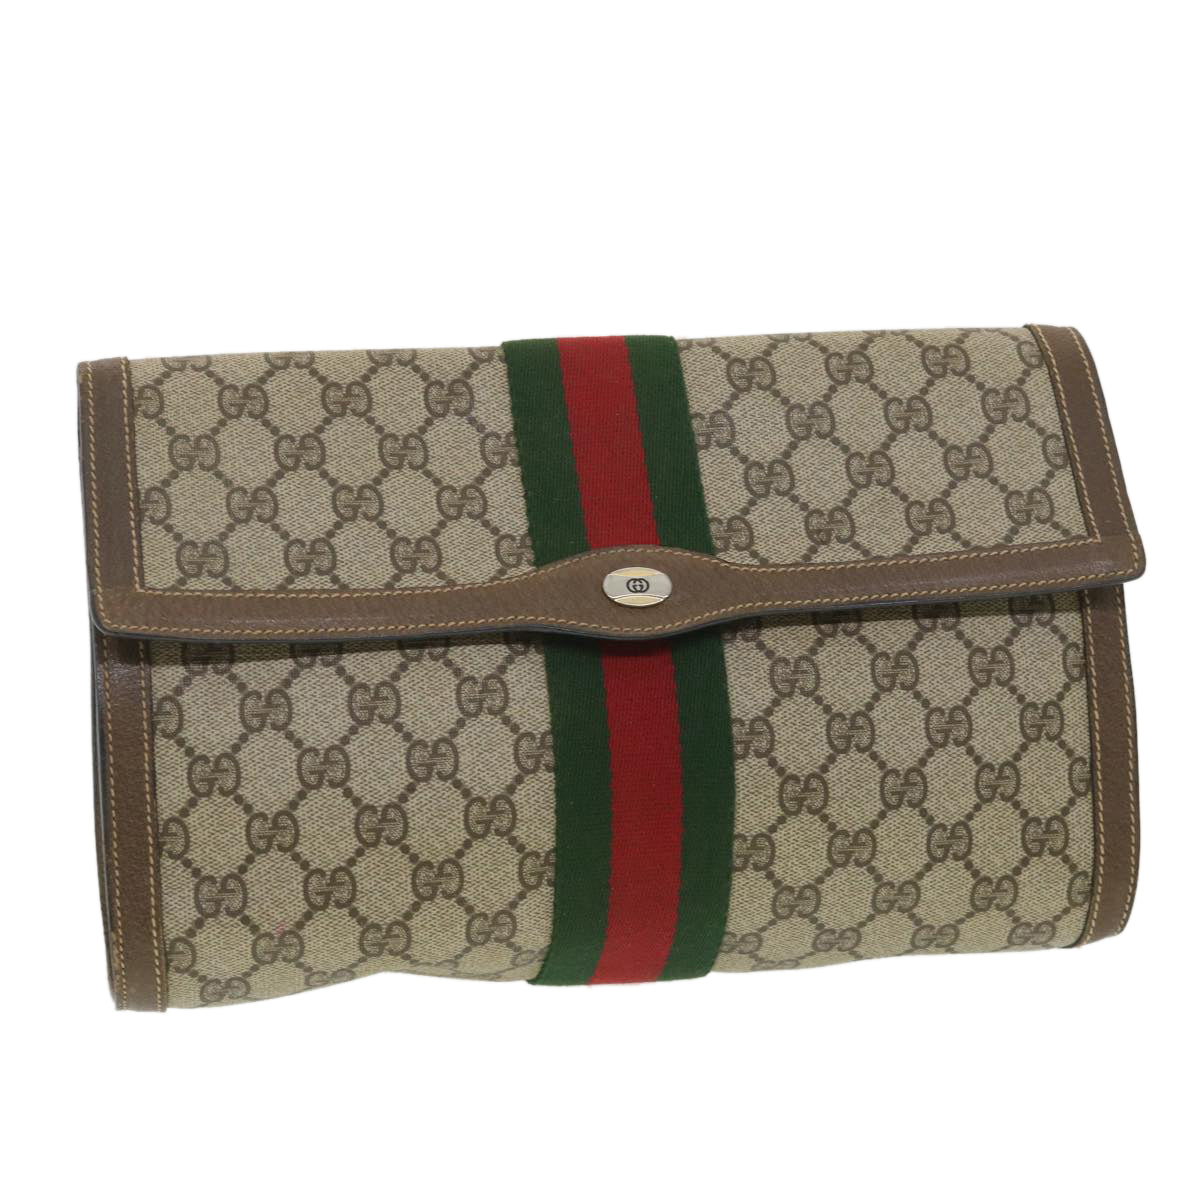 GUCCI GG Canvas Web Sherry Line Clutch Bag Beige Red Green 89.01.007 Auth ny216